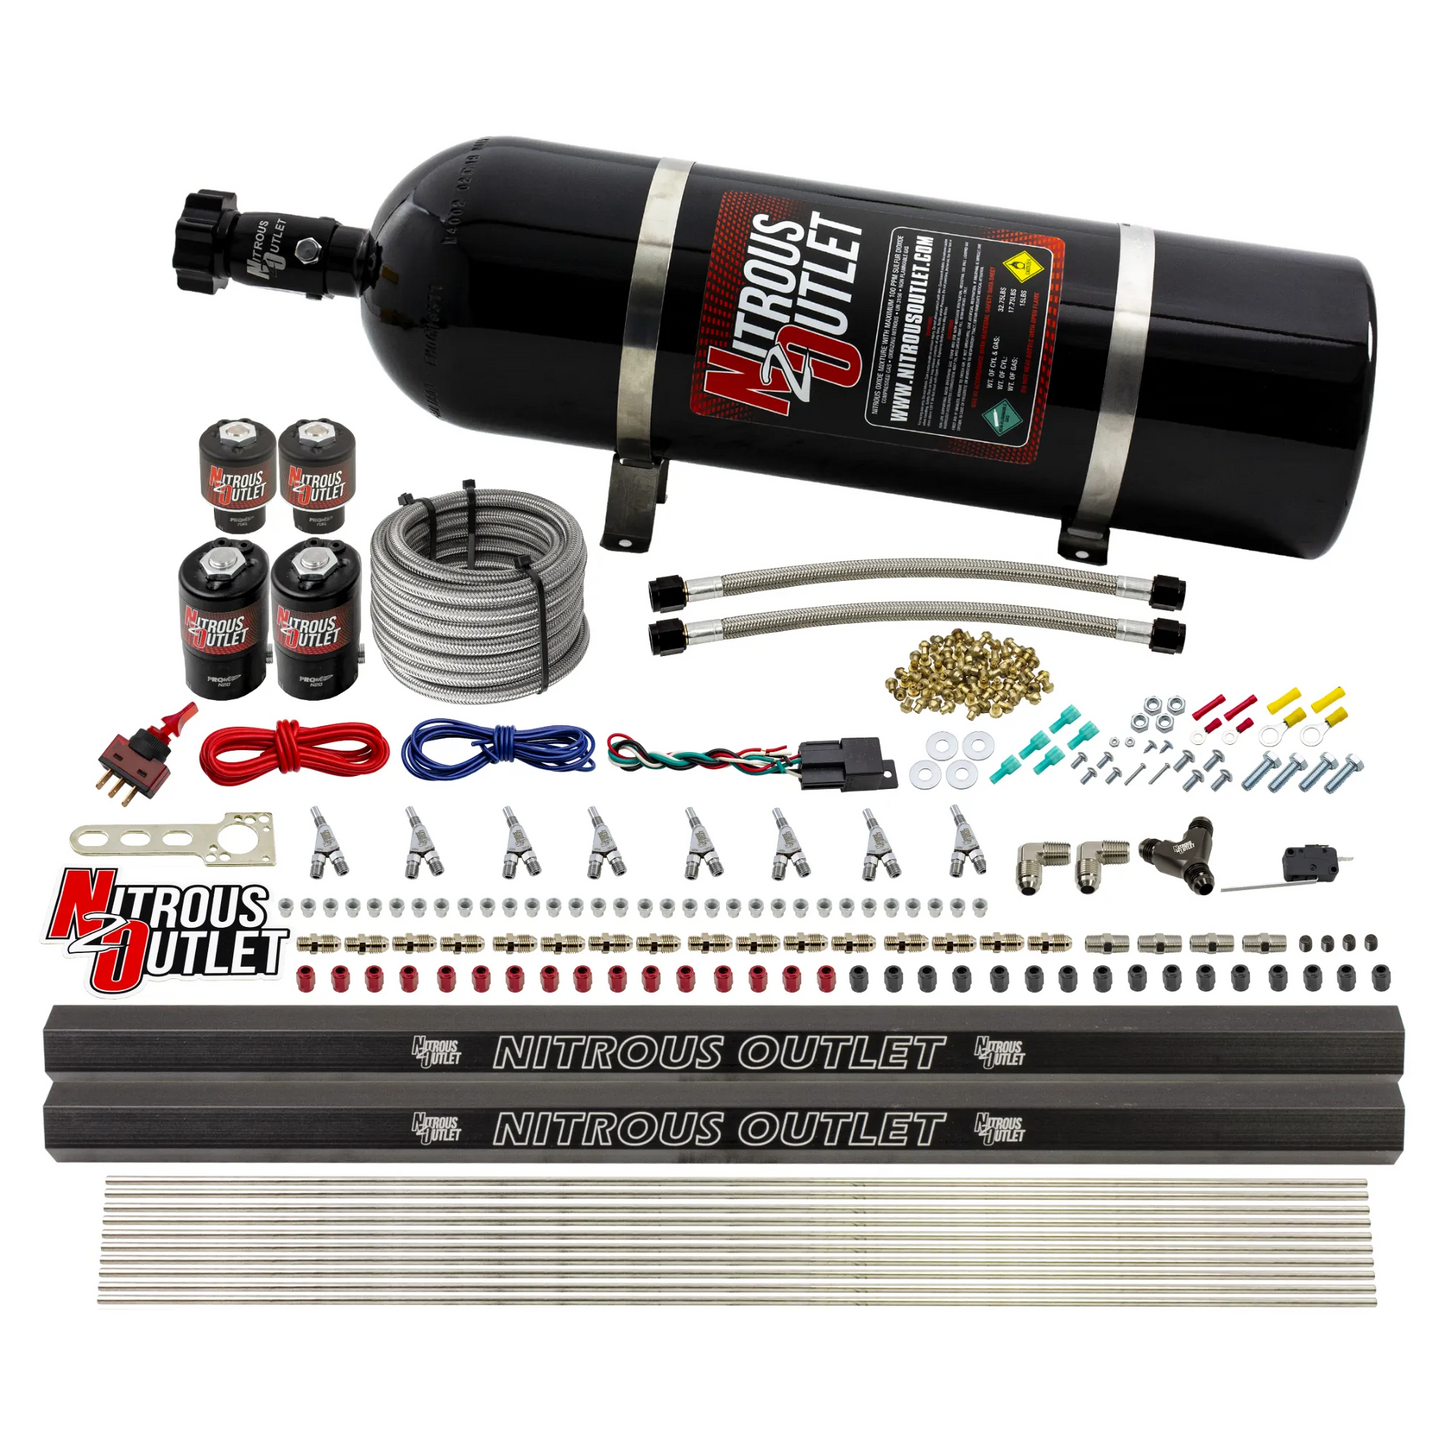 8 Cylinder Single Stage Direct Port Nitrous System with Injection Rails - E85 - .112 Nitrous/.177 Fuel - 45-55 PSI - Straight Blow Through Nozzles